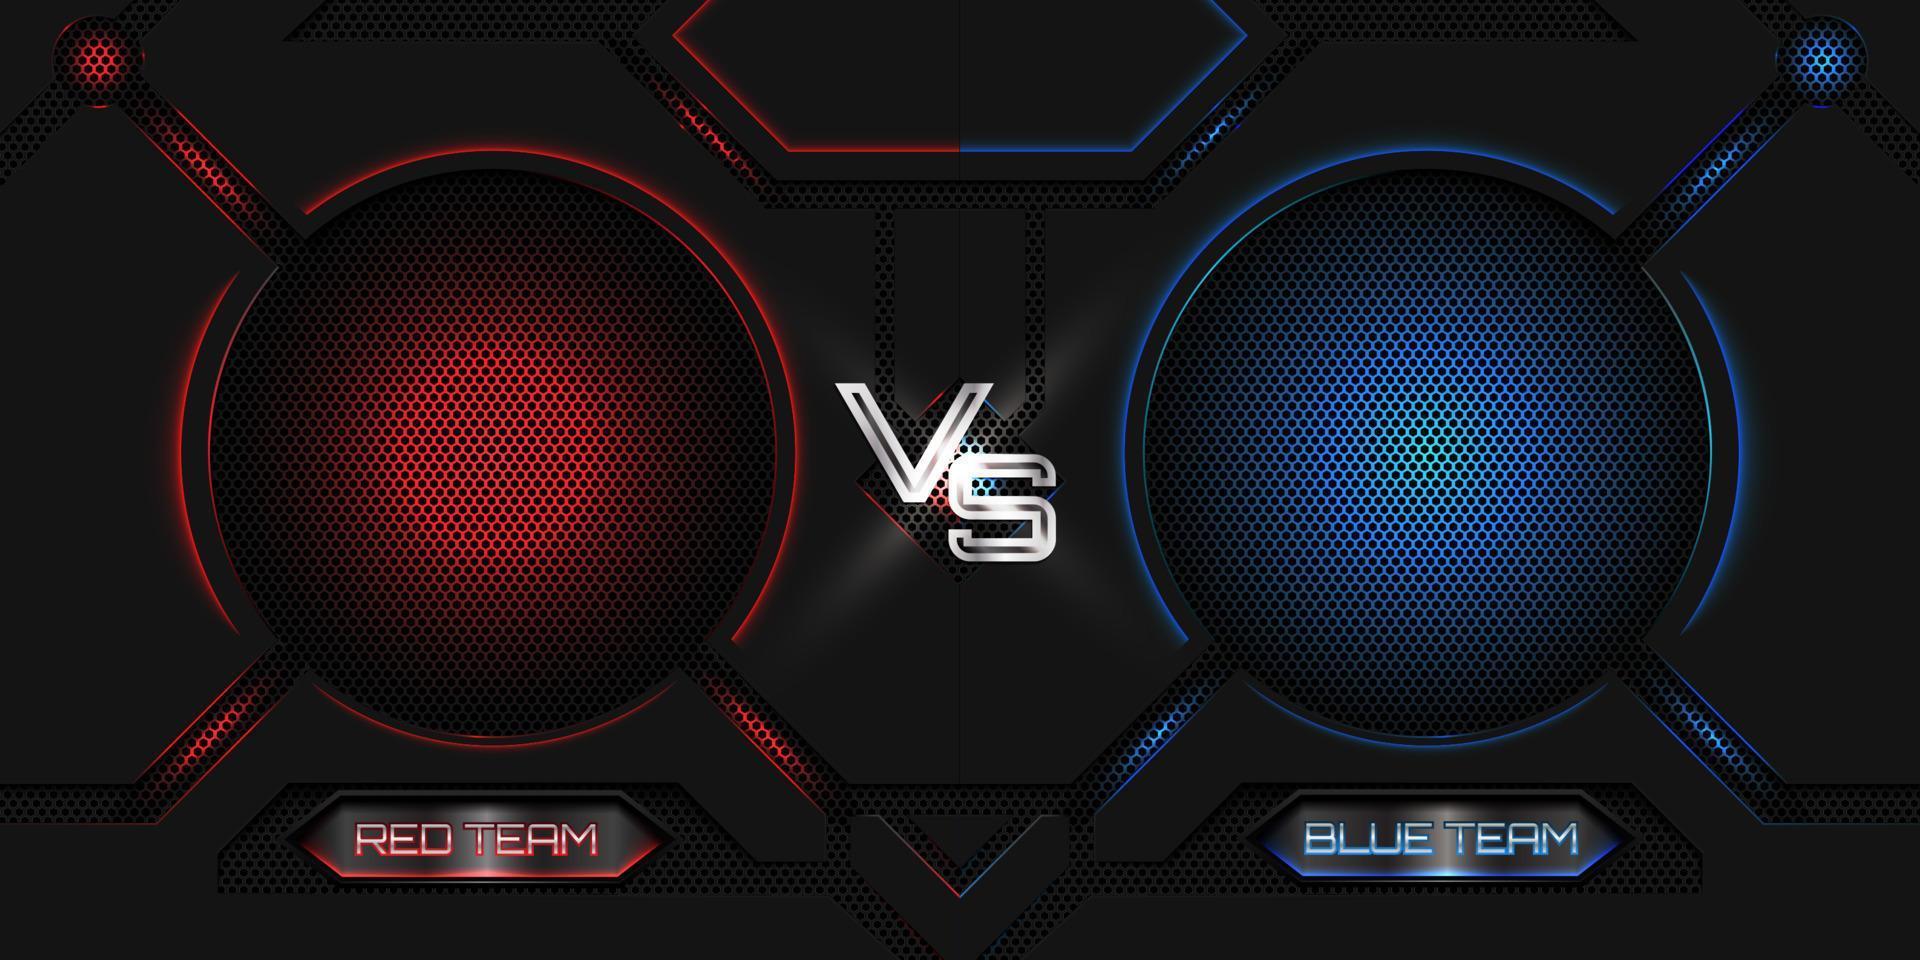 Versus battle fighting realistic 3d banner with red and blue neon light vector